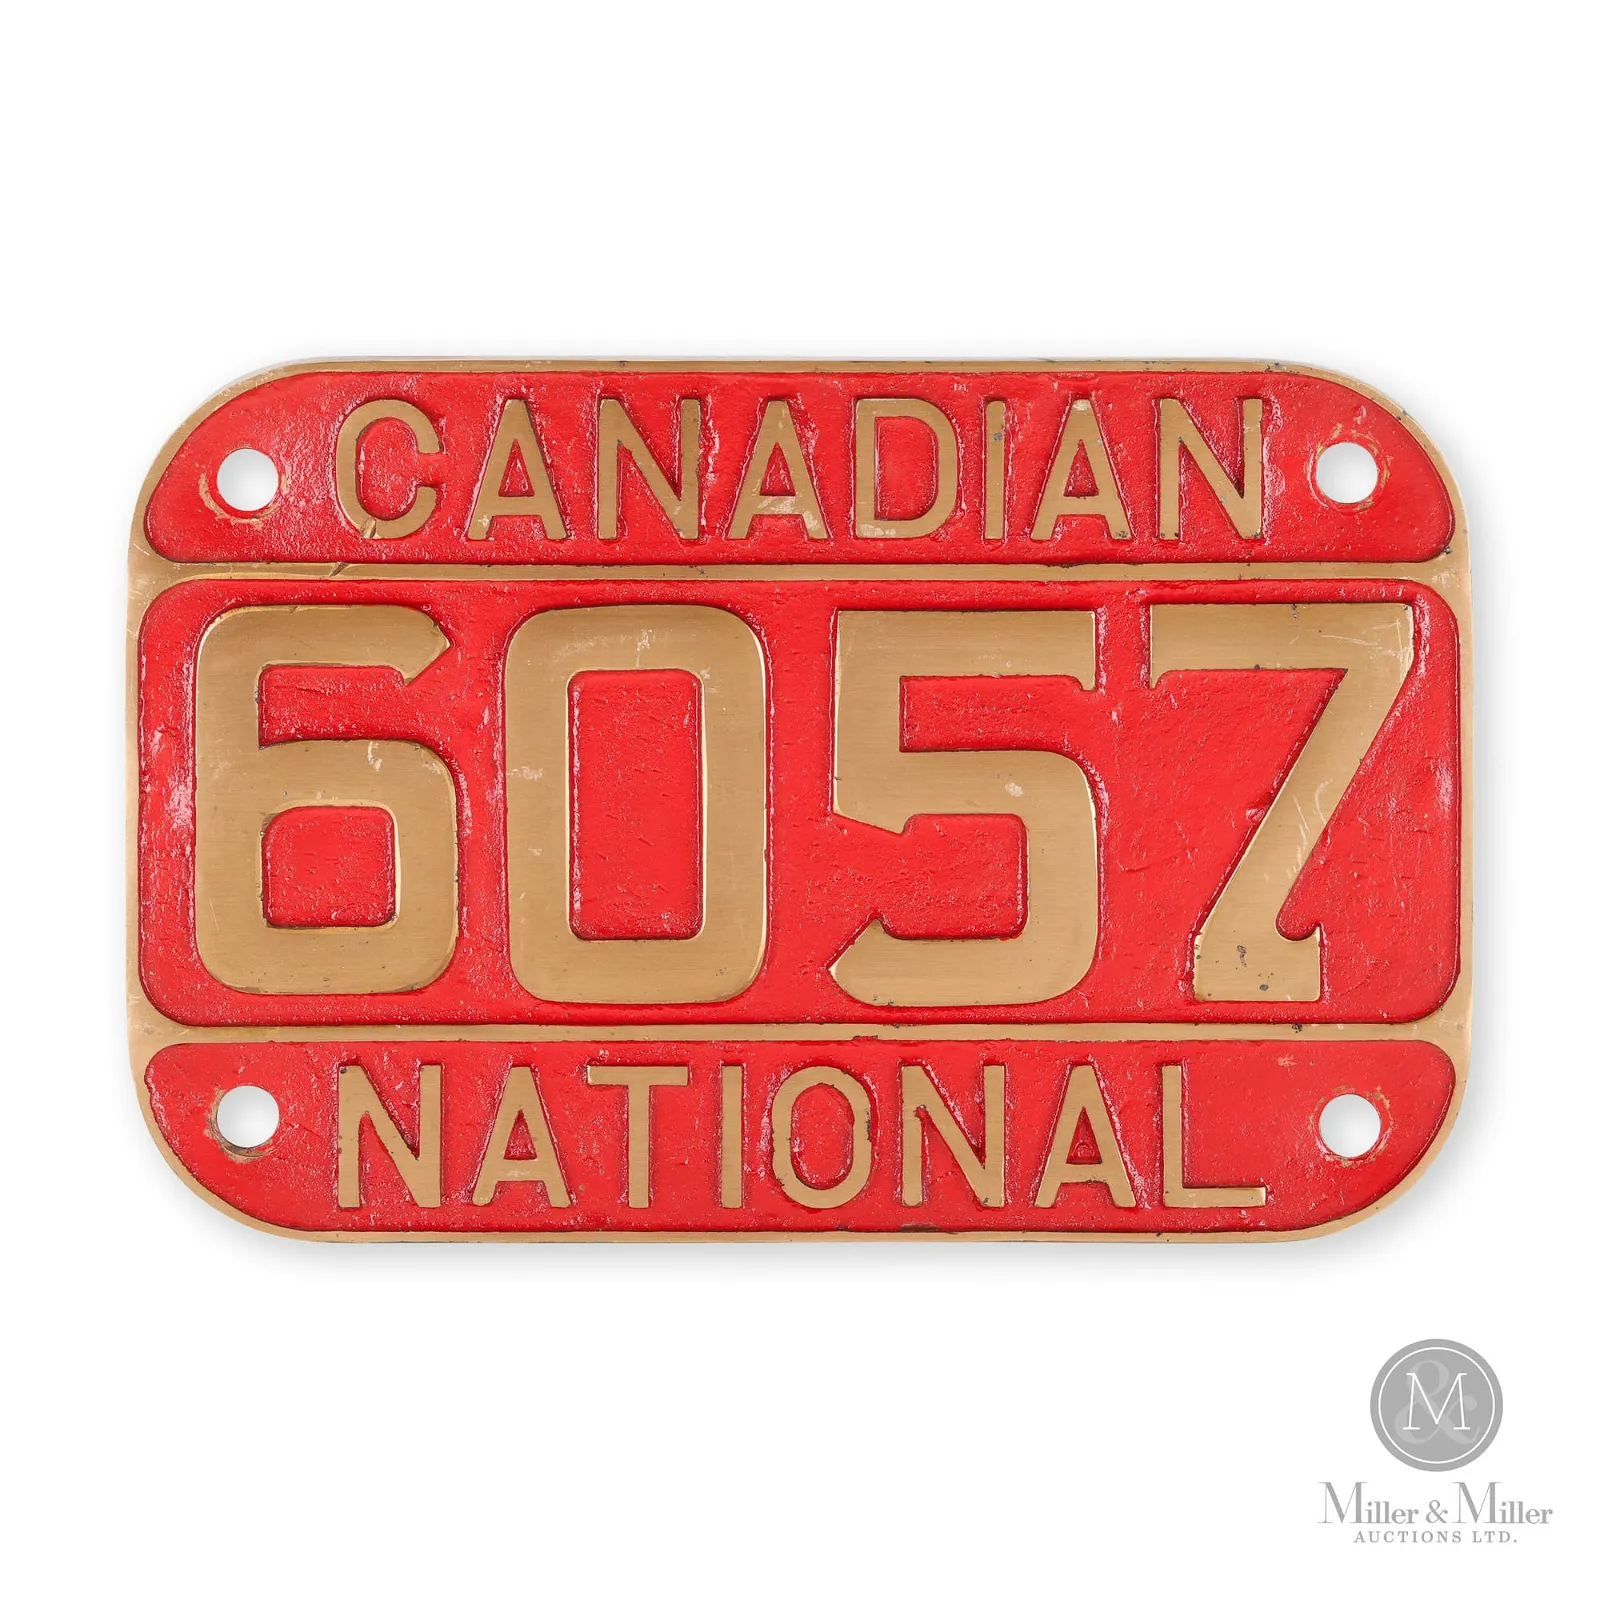 Canadian National Locomotive Mountain-type brass number plate, used during a 1939 Royal Train Ride, estimated at CA$5,000-$8,000 ($3,700-$5,925) at Miller & Miller.
